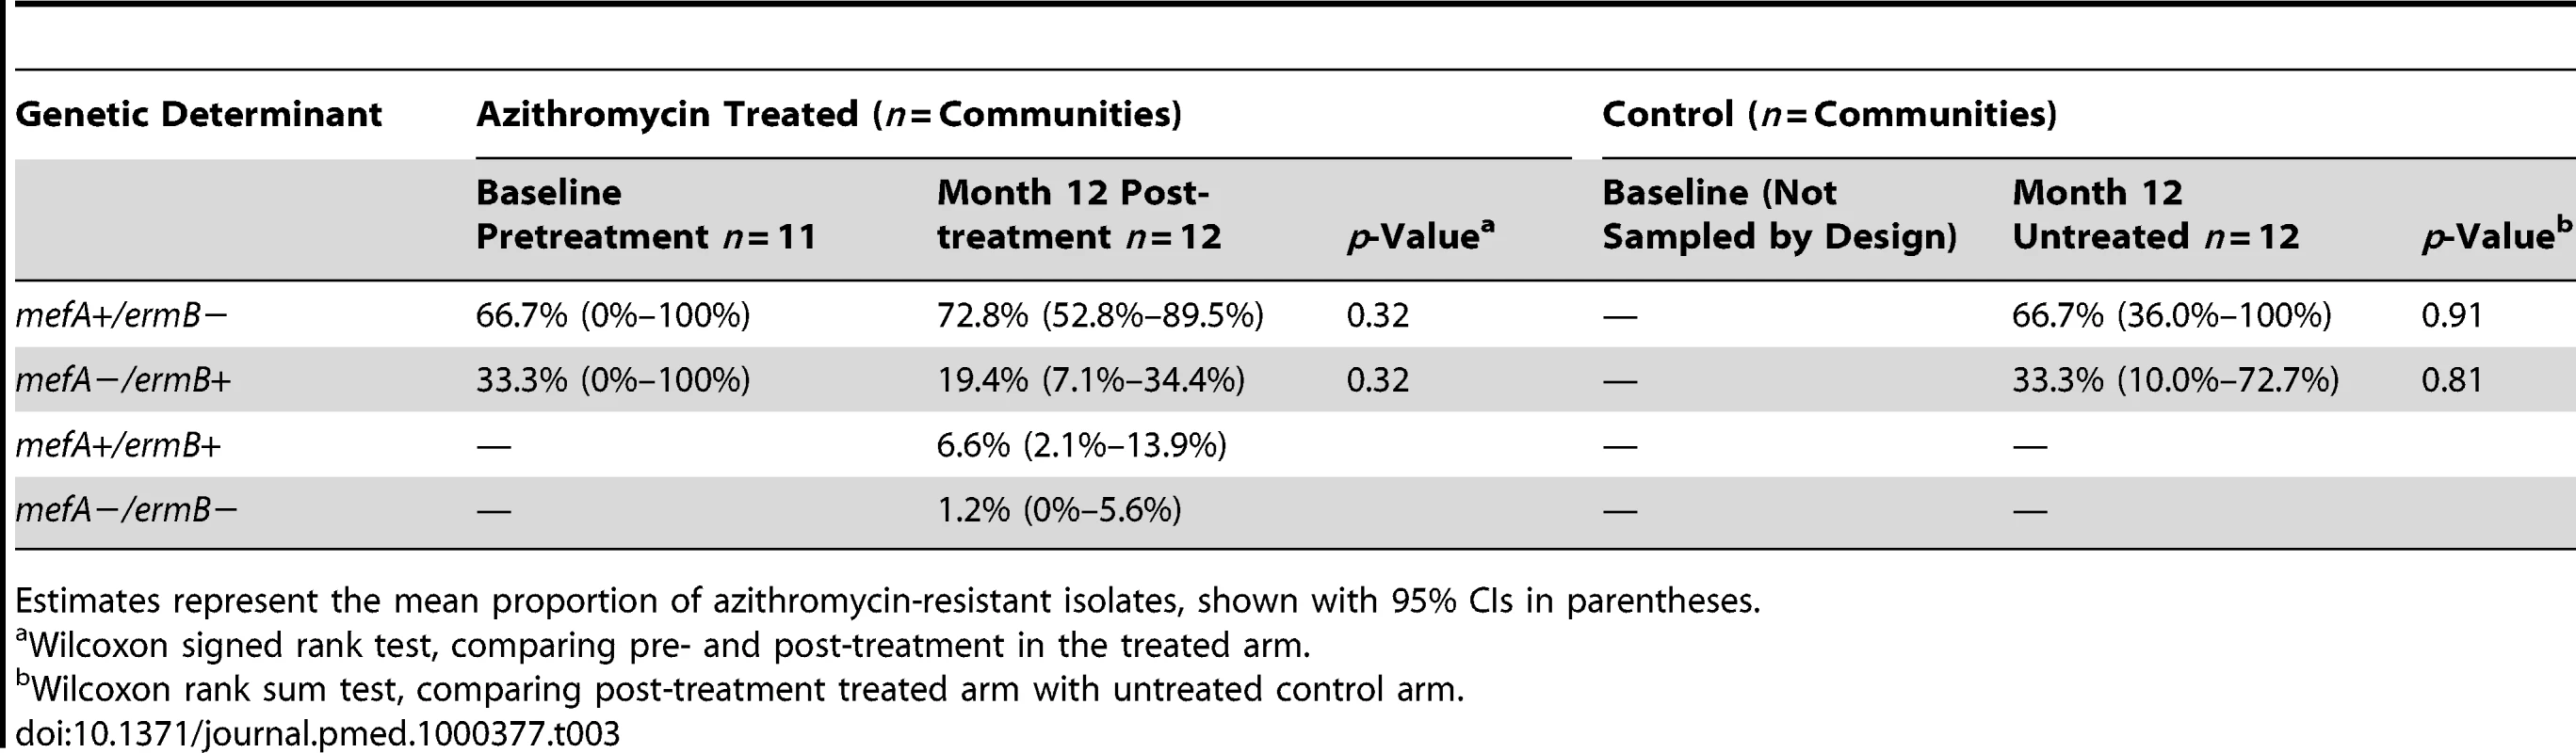 Genotypic characteristics of azithromycin-resistant isolates from children aged &lt;10 y old in the treated group (pre- and post-treatment), and the untreated control group.